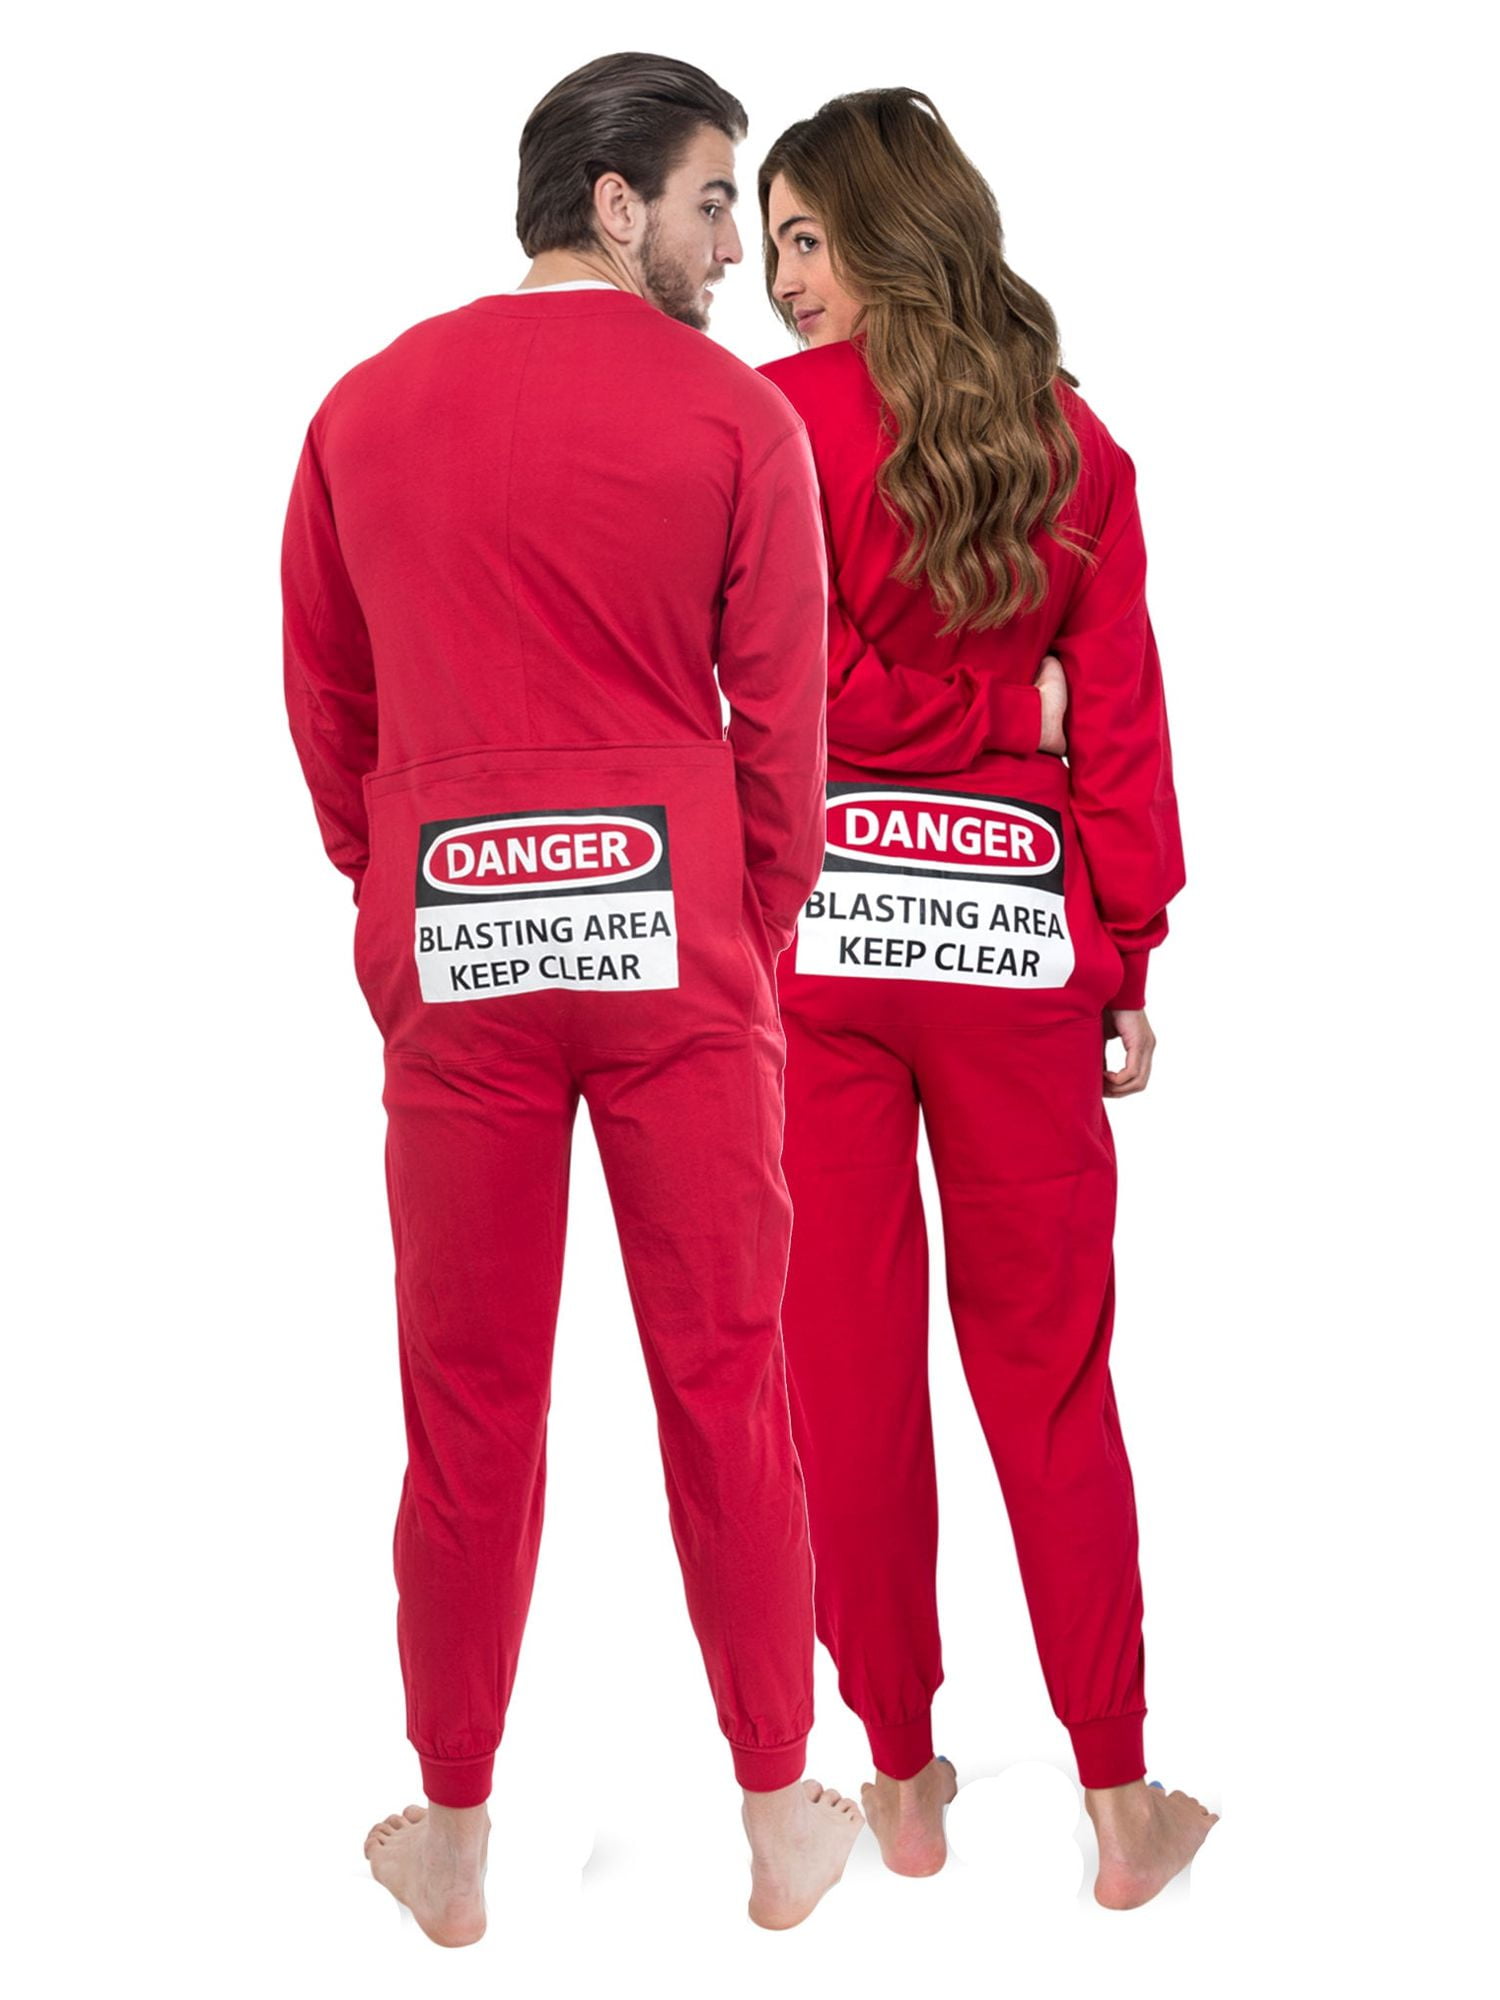 Red Union Suit Sleeper Pajamas with Funny Rear Flap DANGER BLASTING AREA